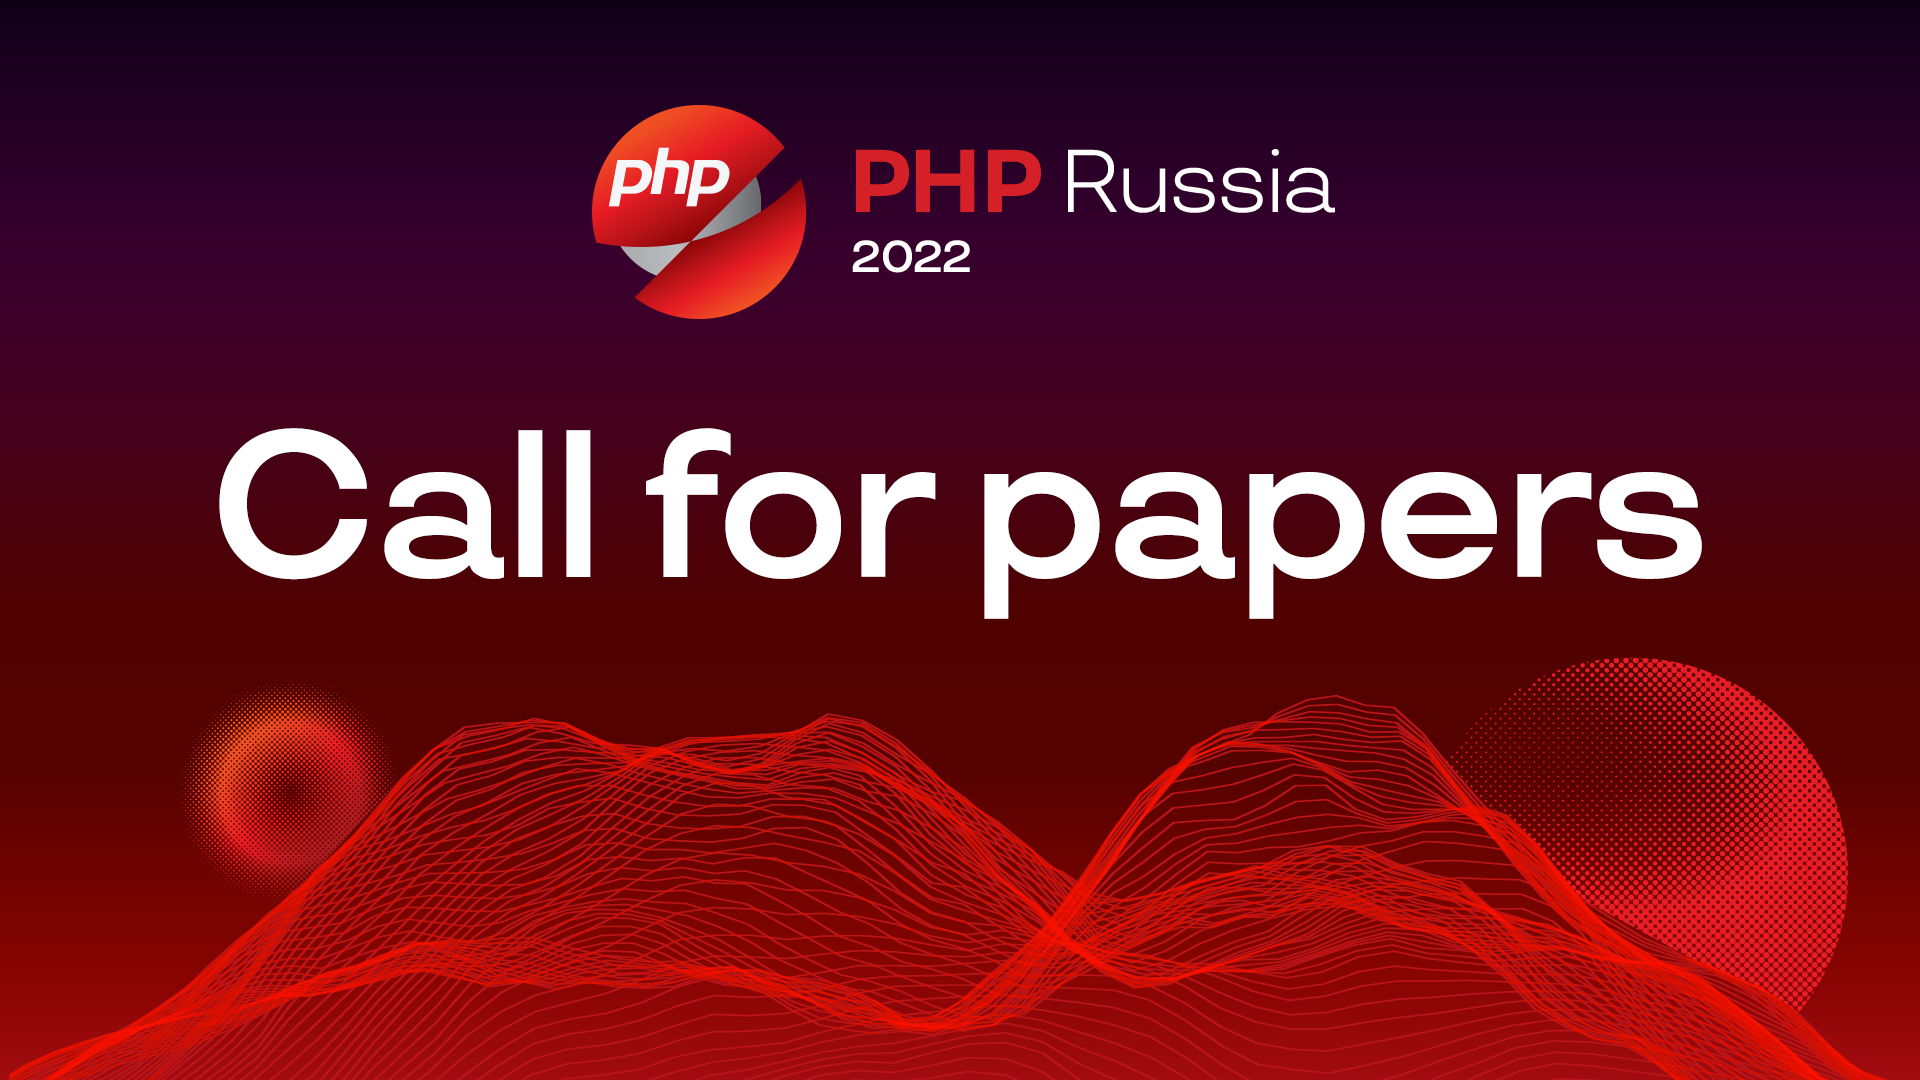 PHP Russia 2022.